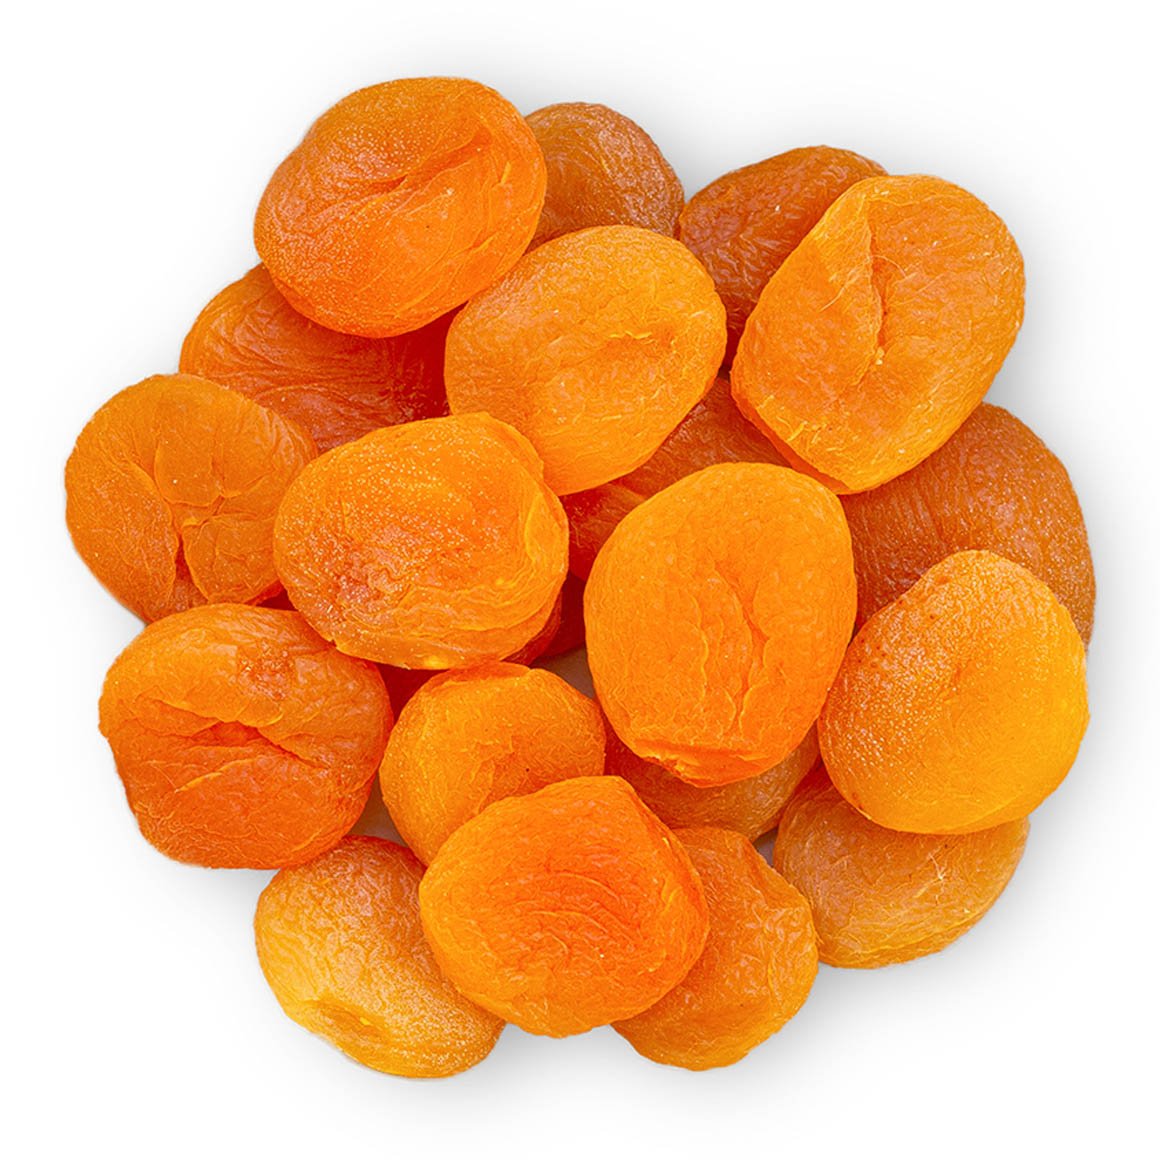 The Scientific Benefits Of Apricot Are Astonishing